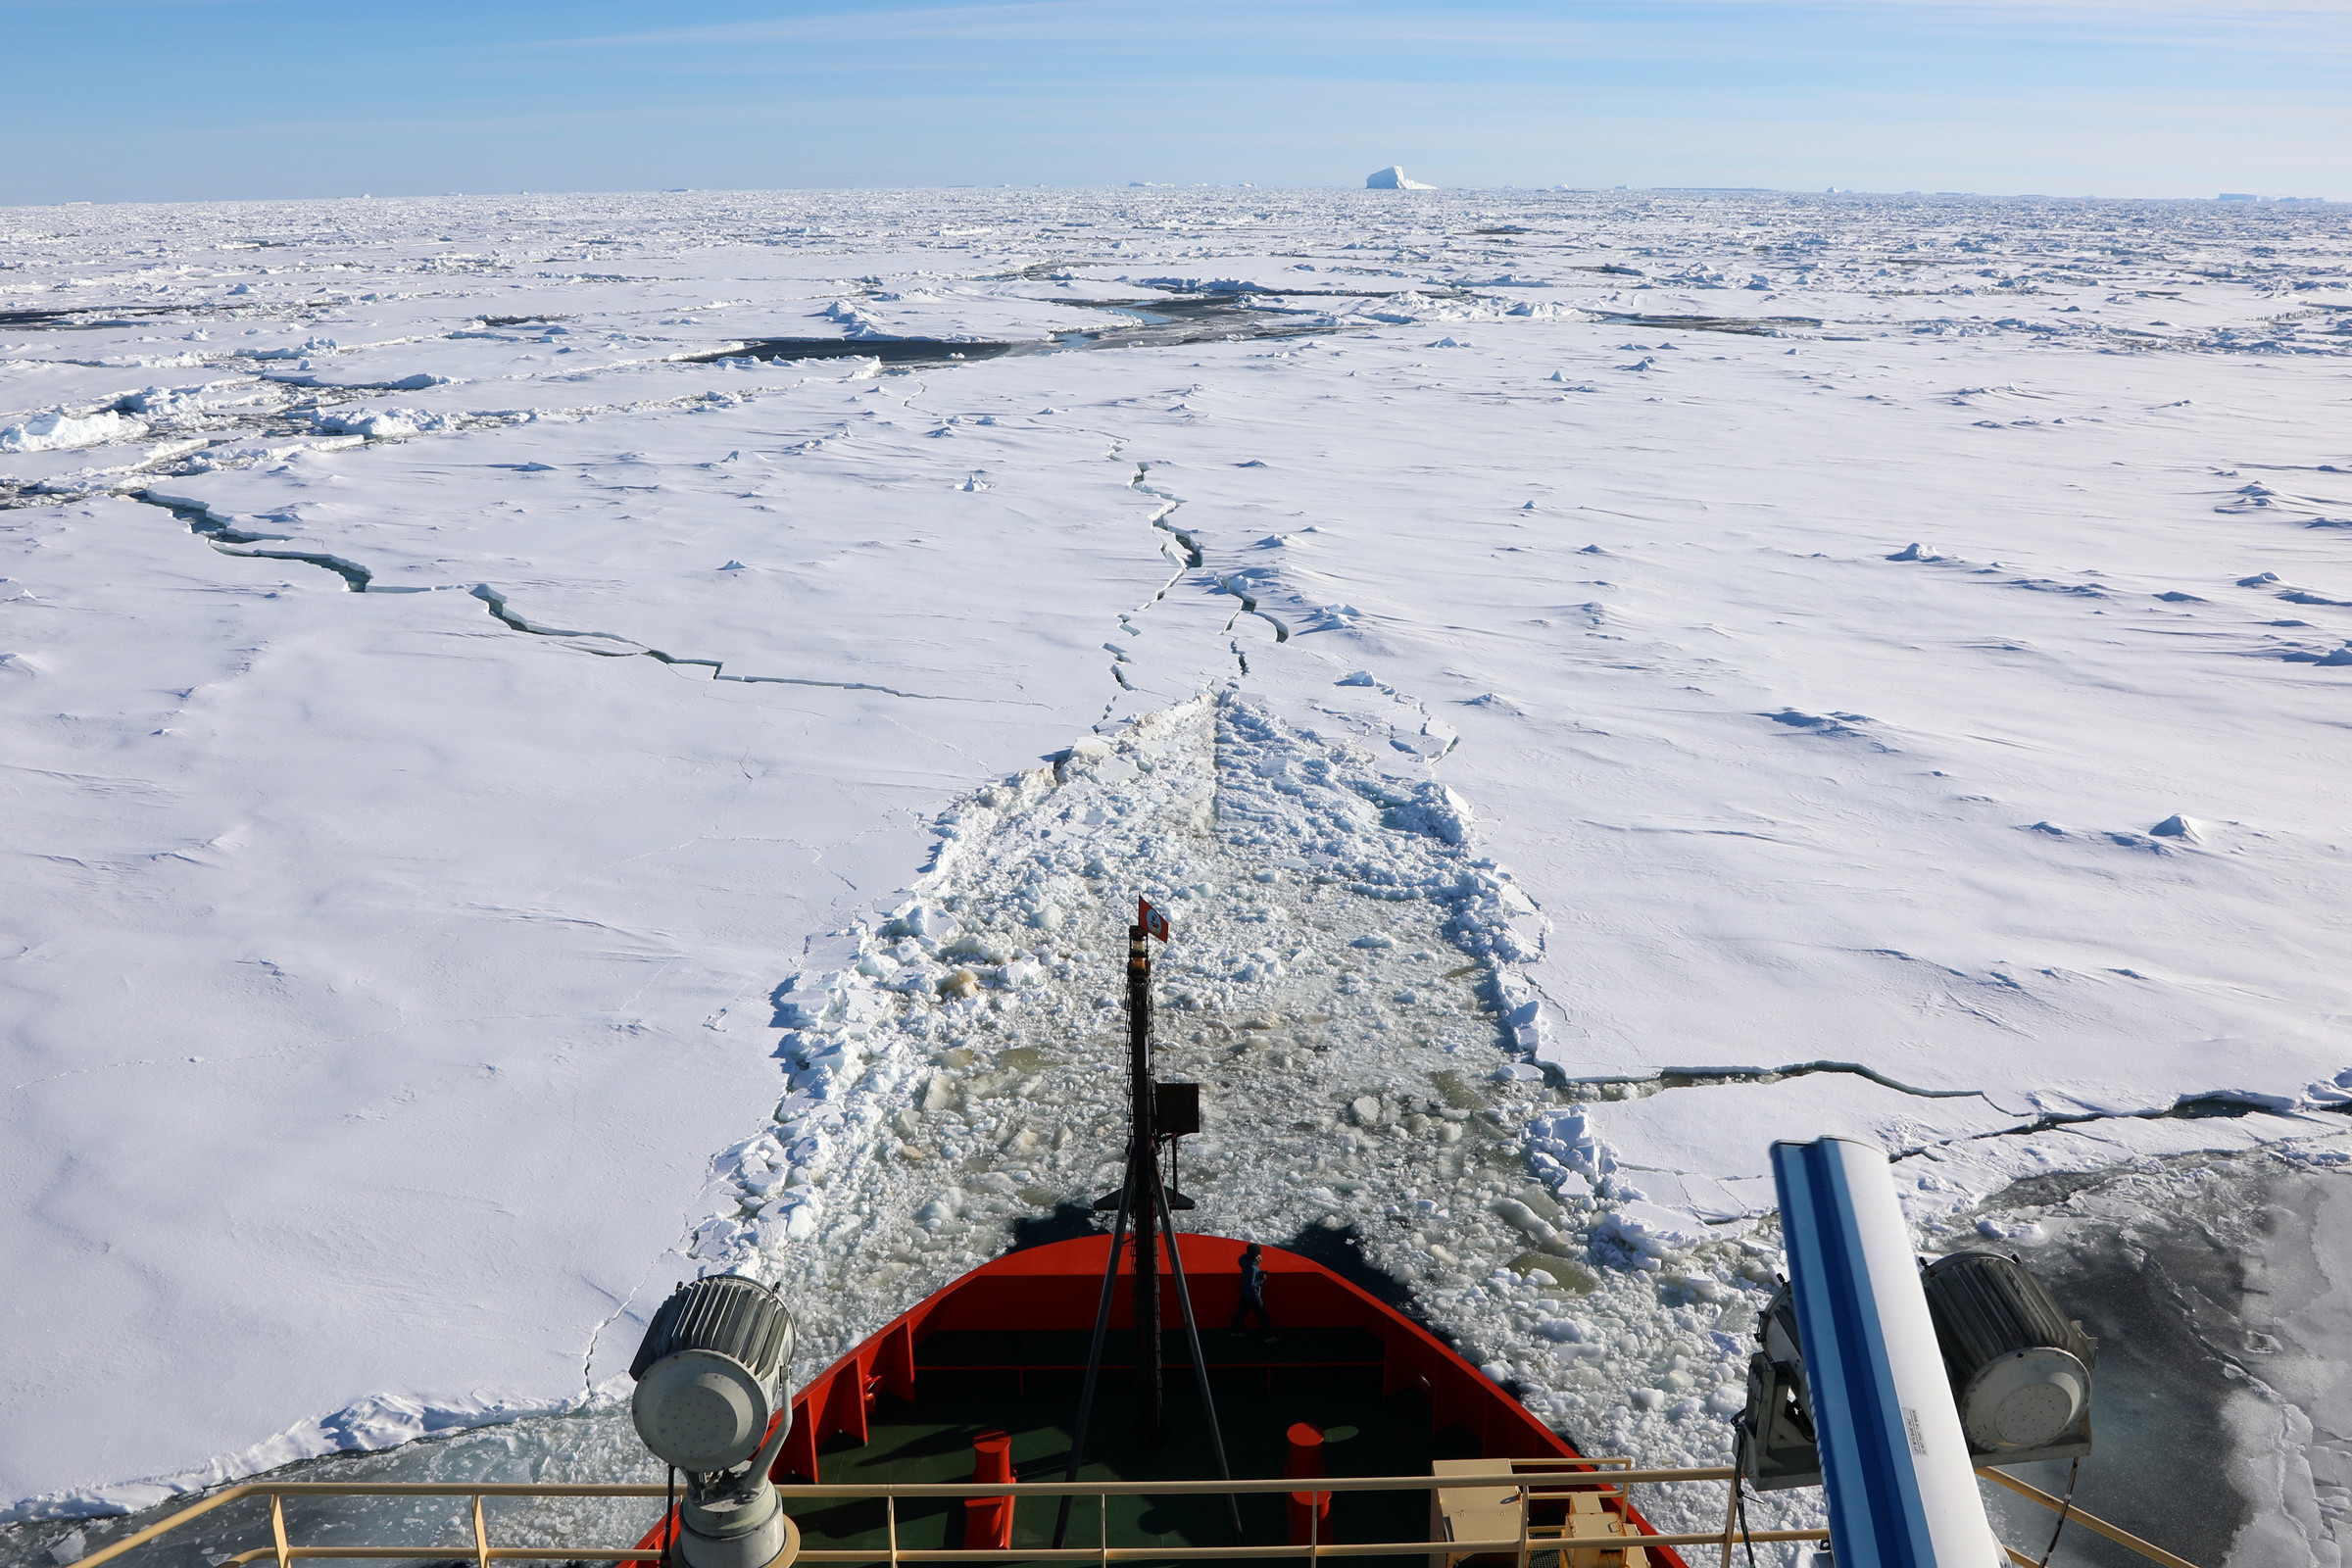 The Nathaniel B. Palmer icebreaking en route to Rothera. Photo credit: Linda Welzenbach/Rice University